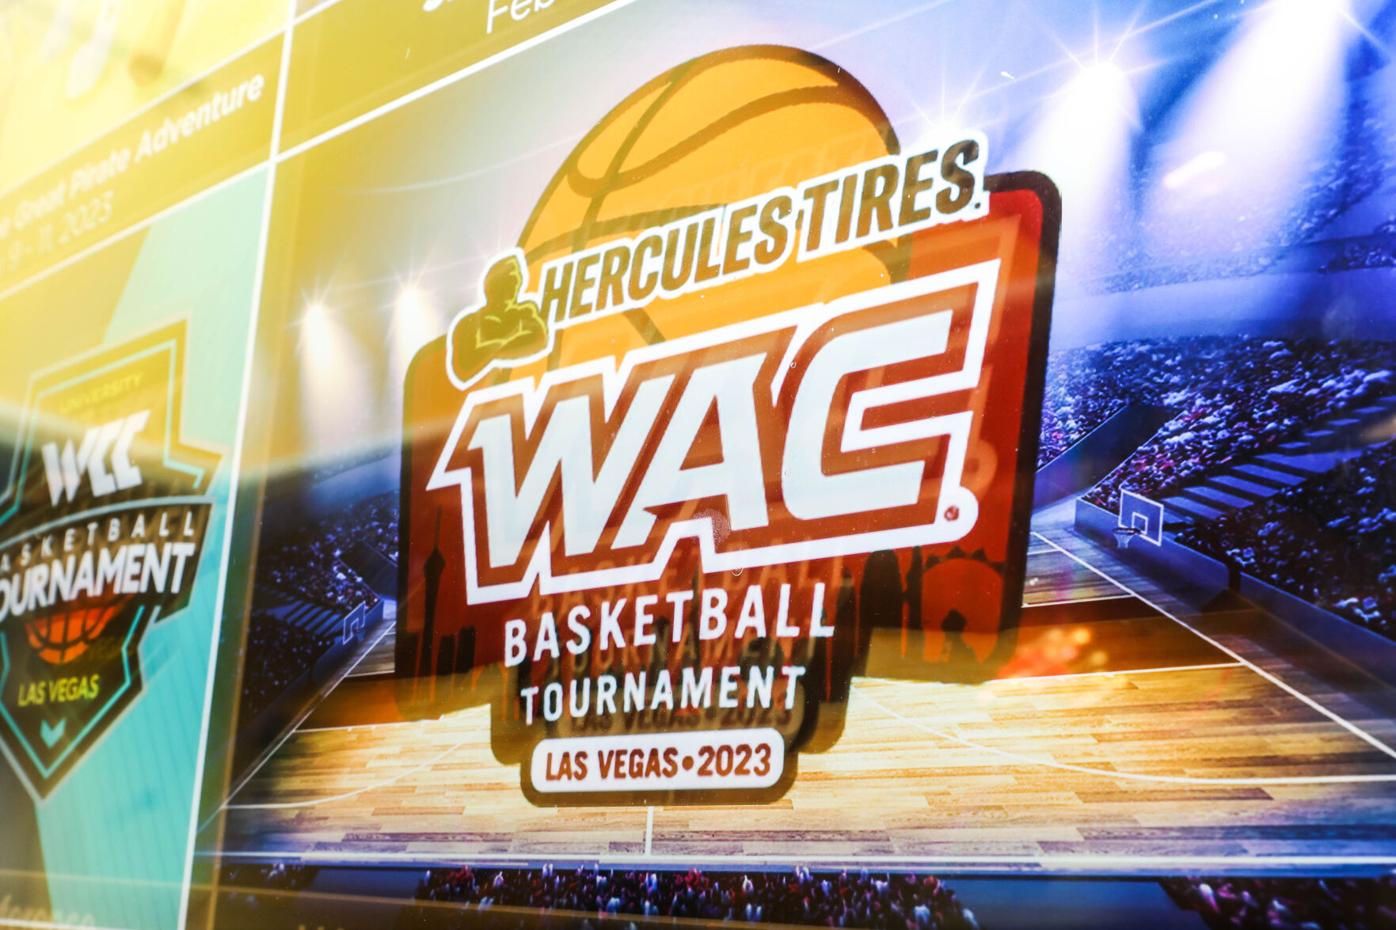 western athletic conference logo